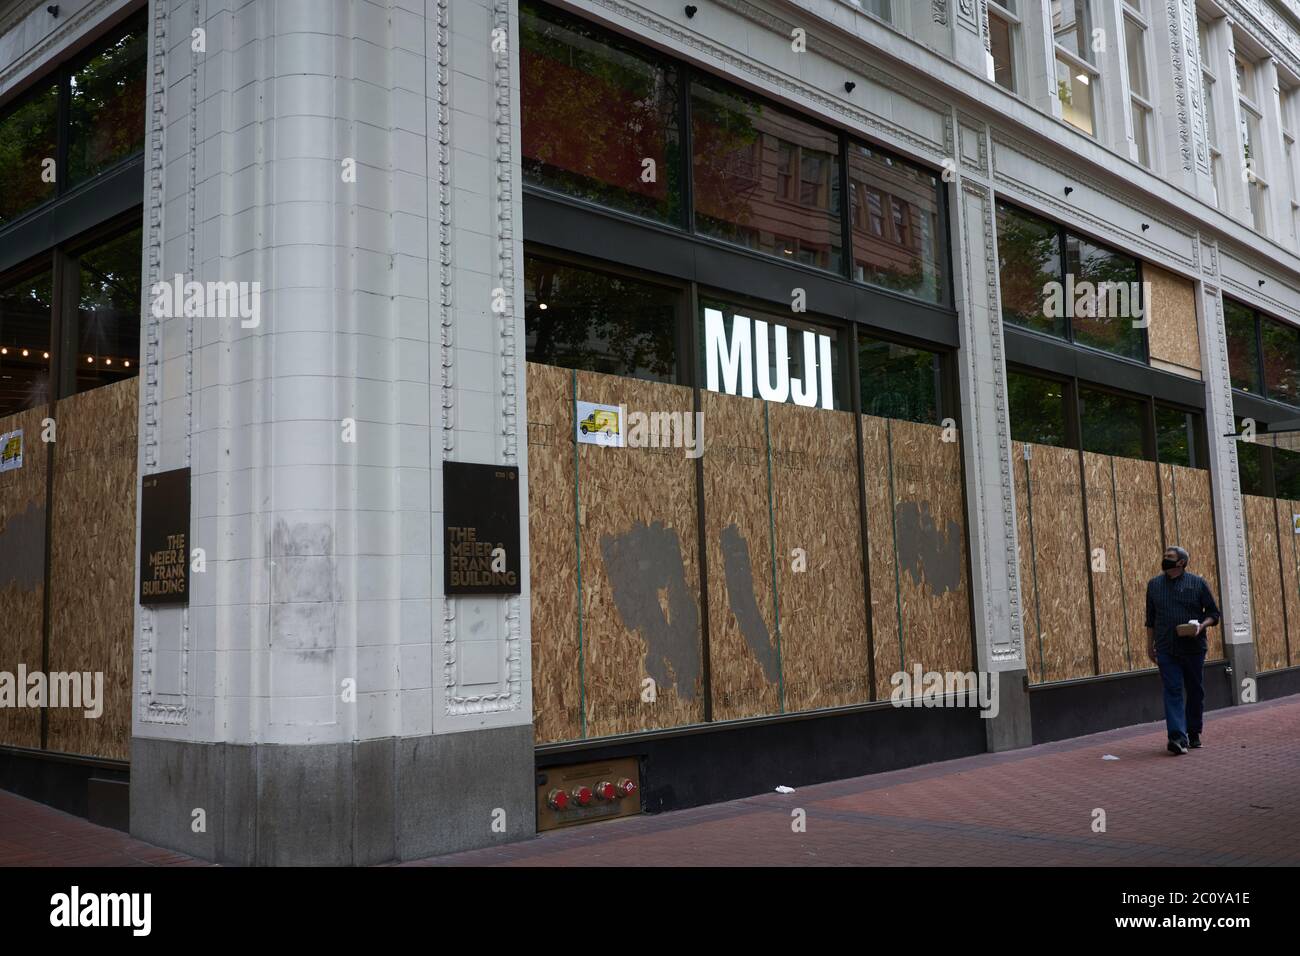 The MUJI store in downtown Portland, Oregon, is seen boarded up to protect from further damage amid the protest, on Friday, Jun 12, 2020. Stock Photo